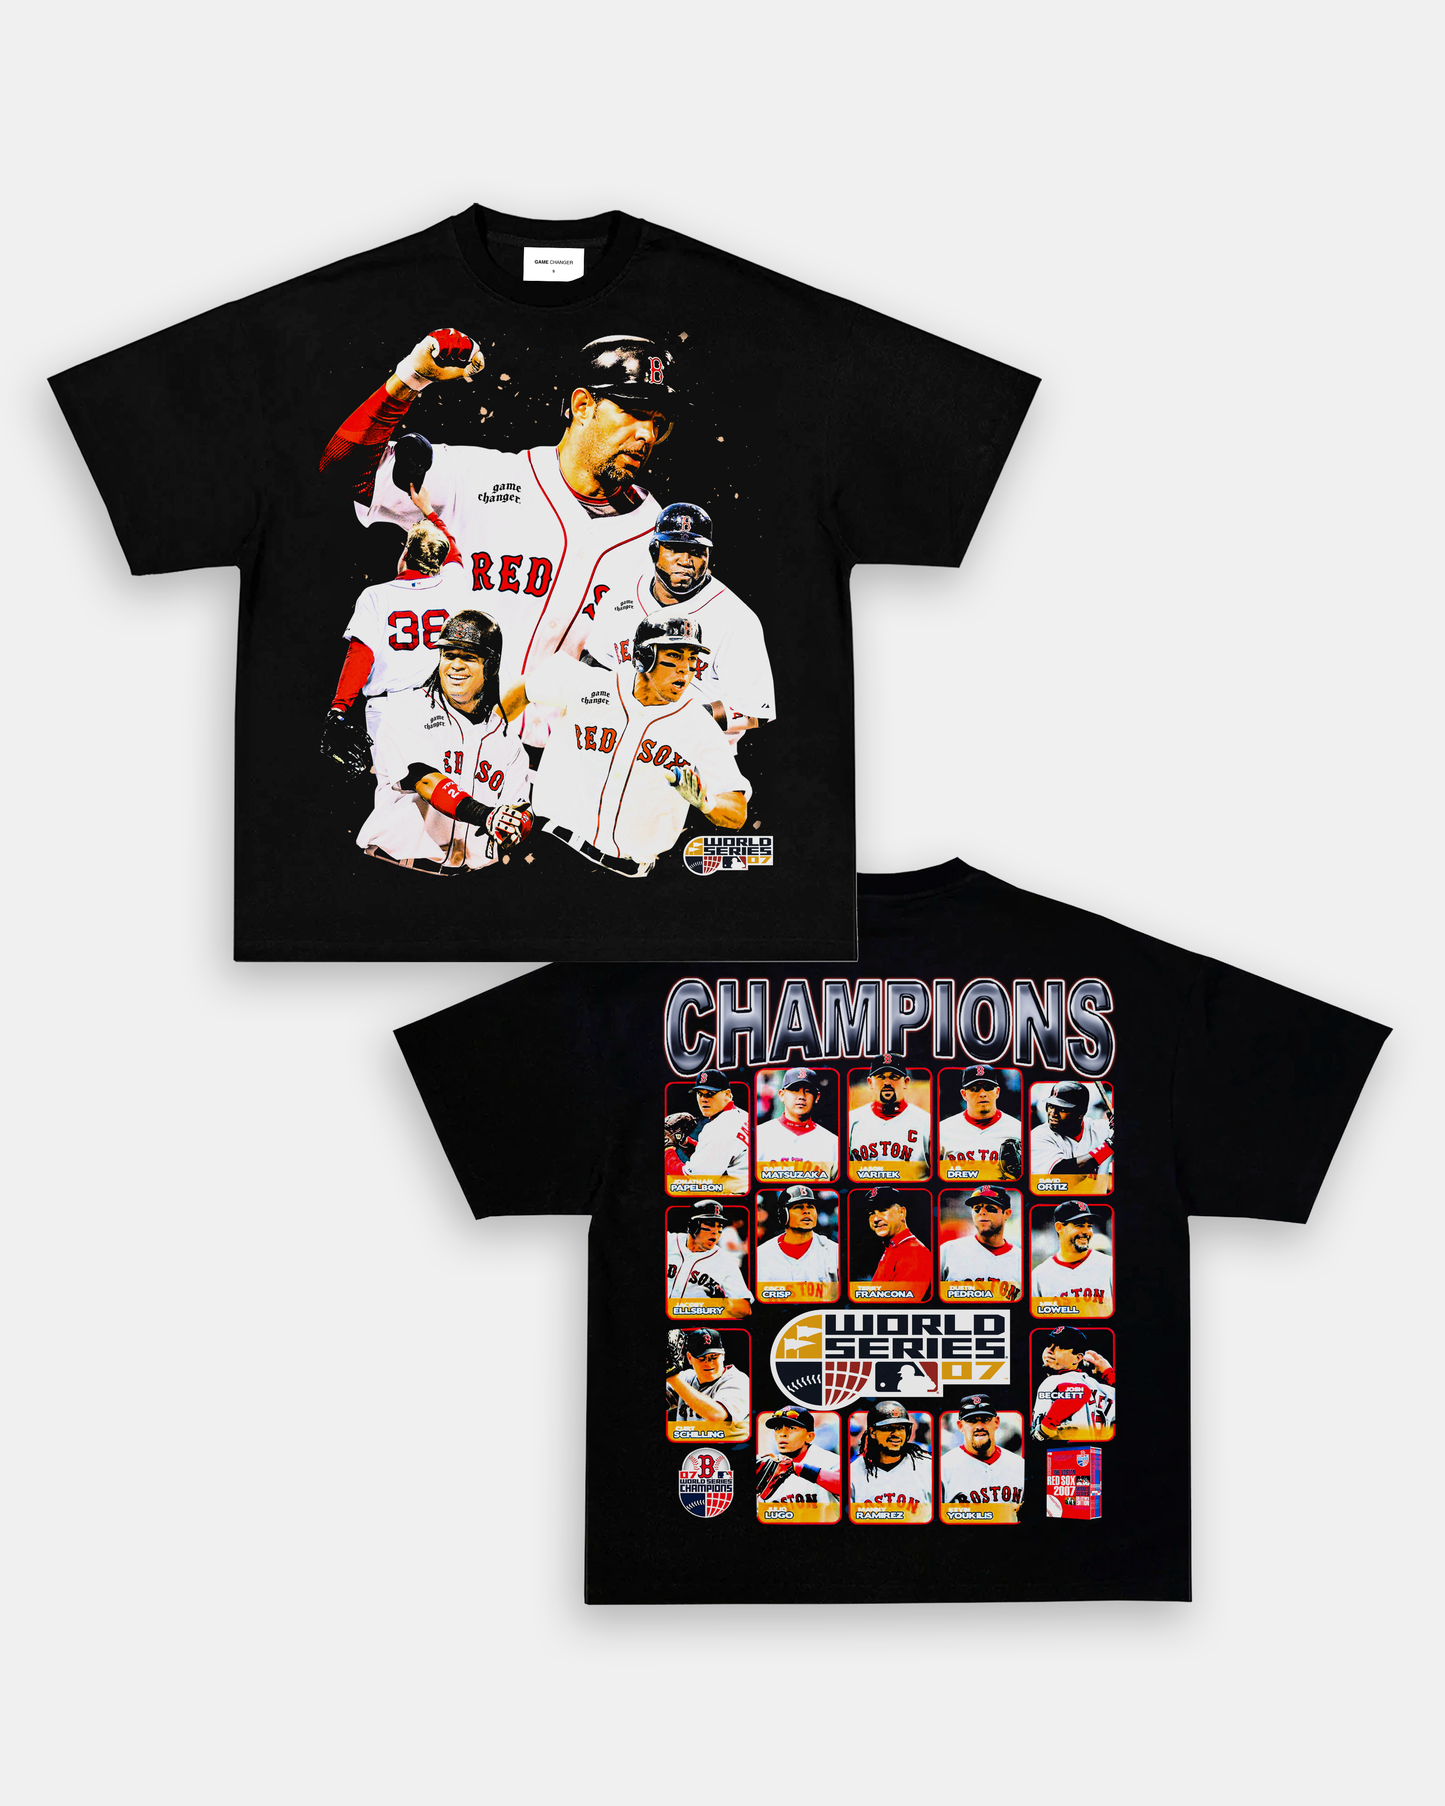 2007 WORLD SERIES CHAMPS - RED SOX TEE - [DS]